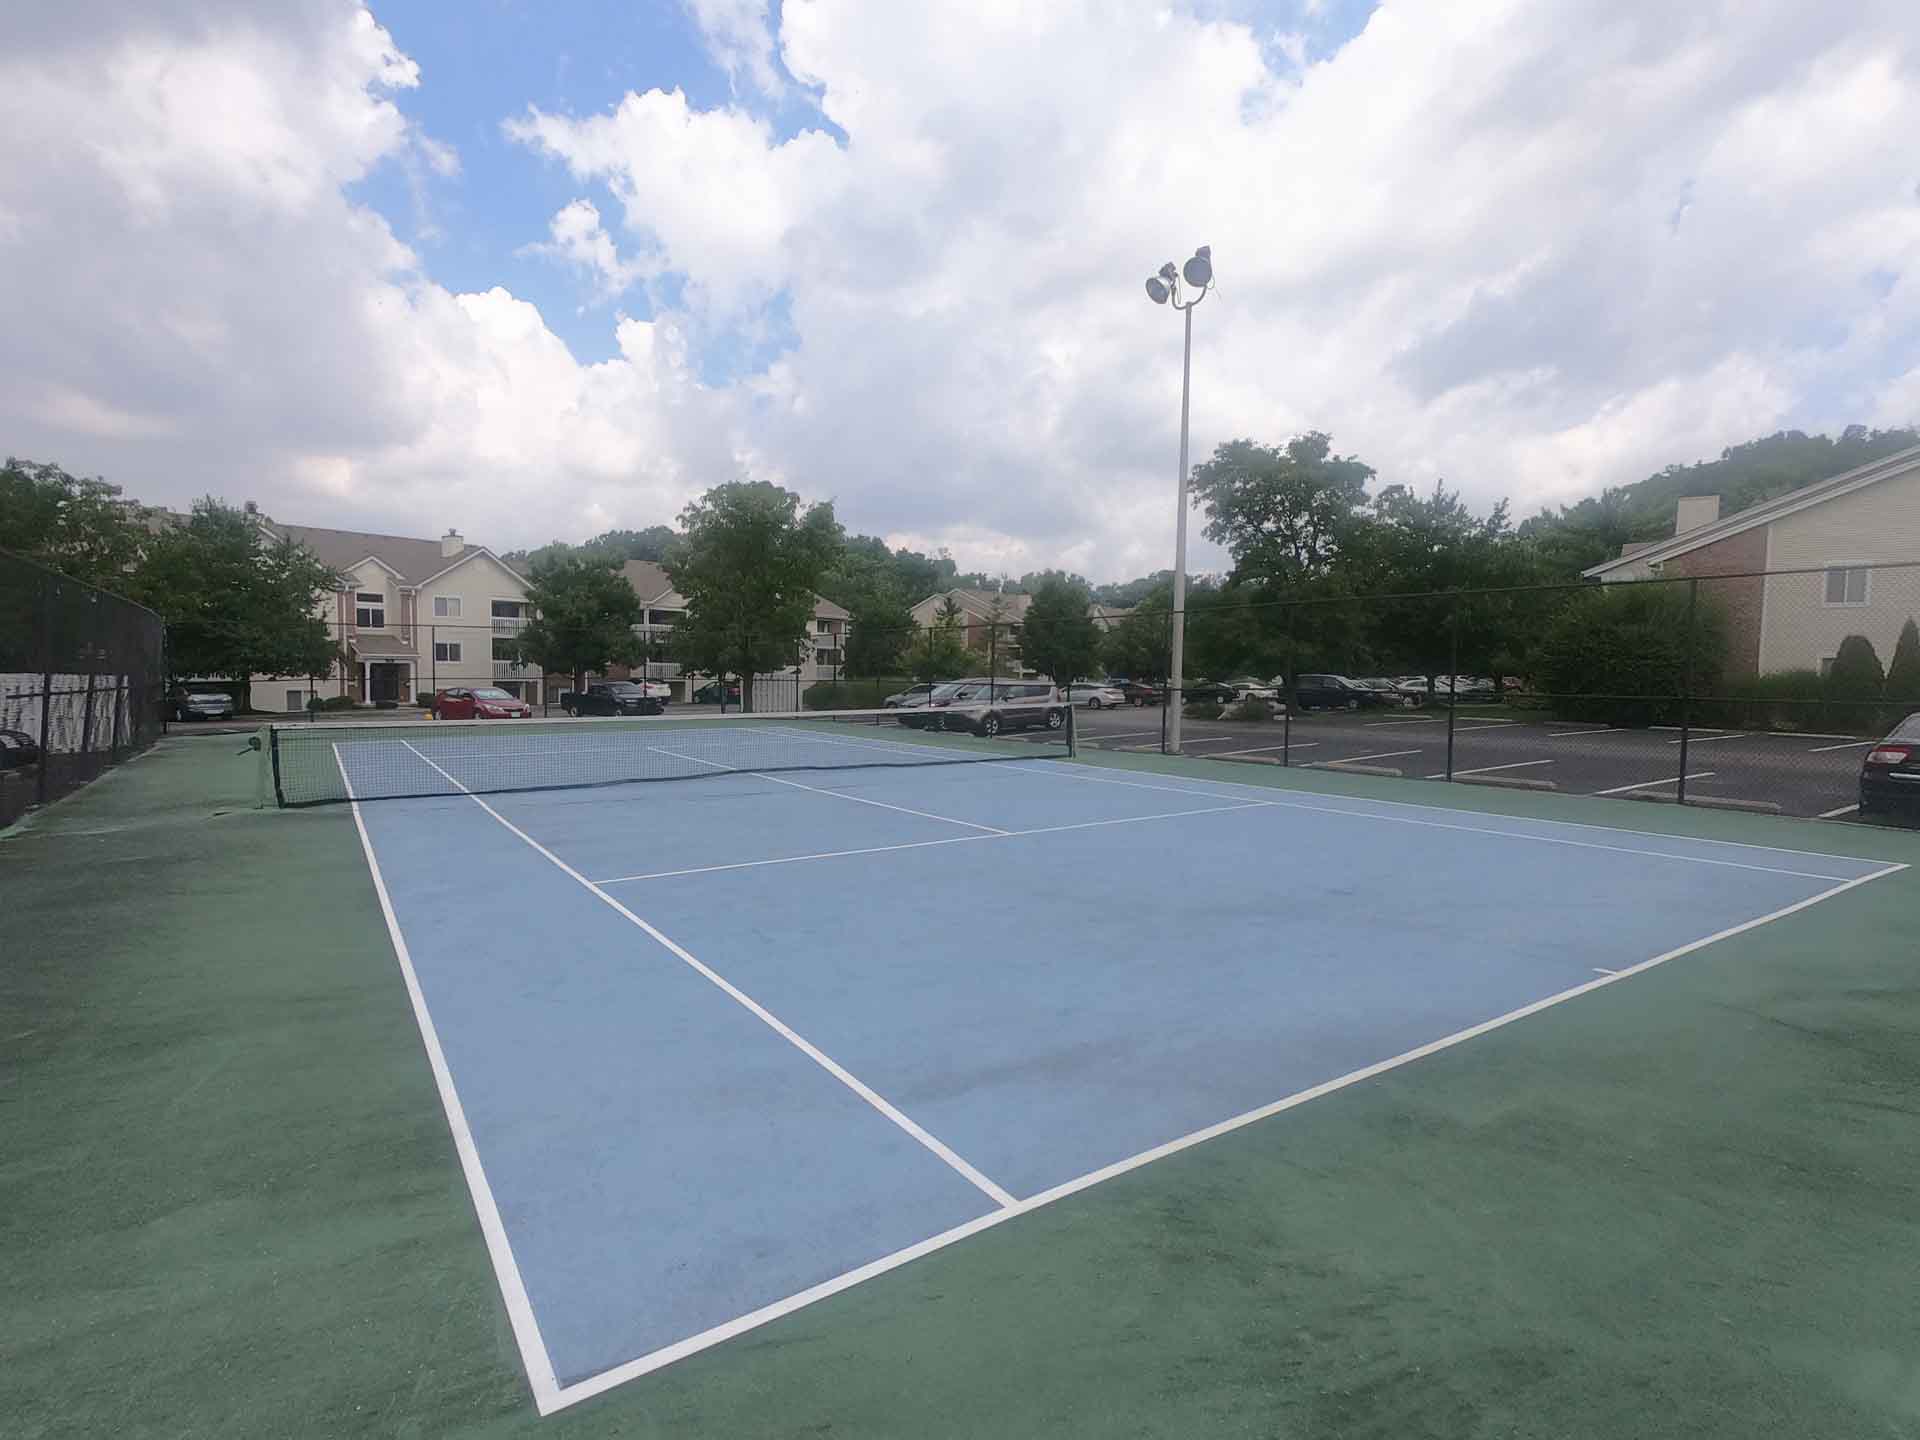 Community tennis court and Fox Chase South.